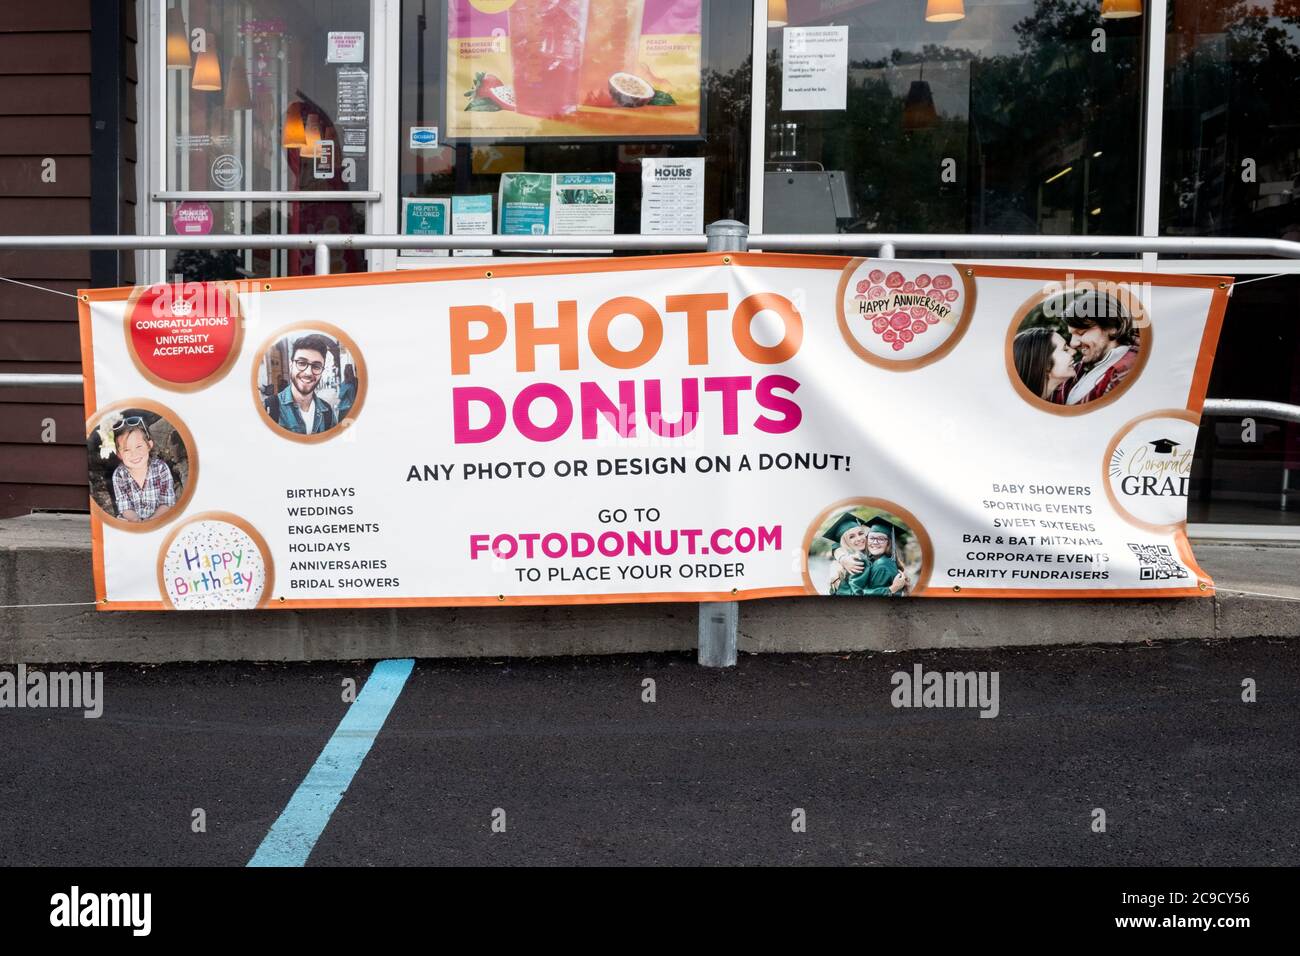 PERSONALIZED DONUTS. A sign outside a Dunkin' Donuts on Francis Lewis Blvd advertising donuts with photos or personalized designs. Queens, New York. Stock Photo